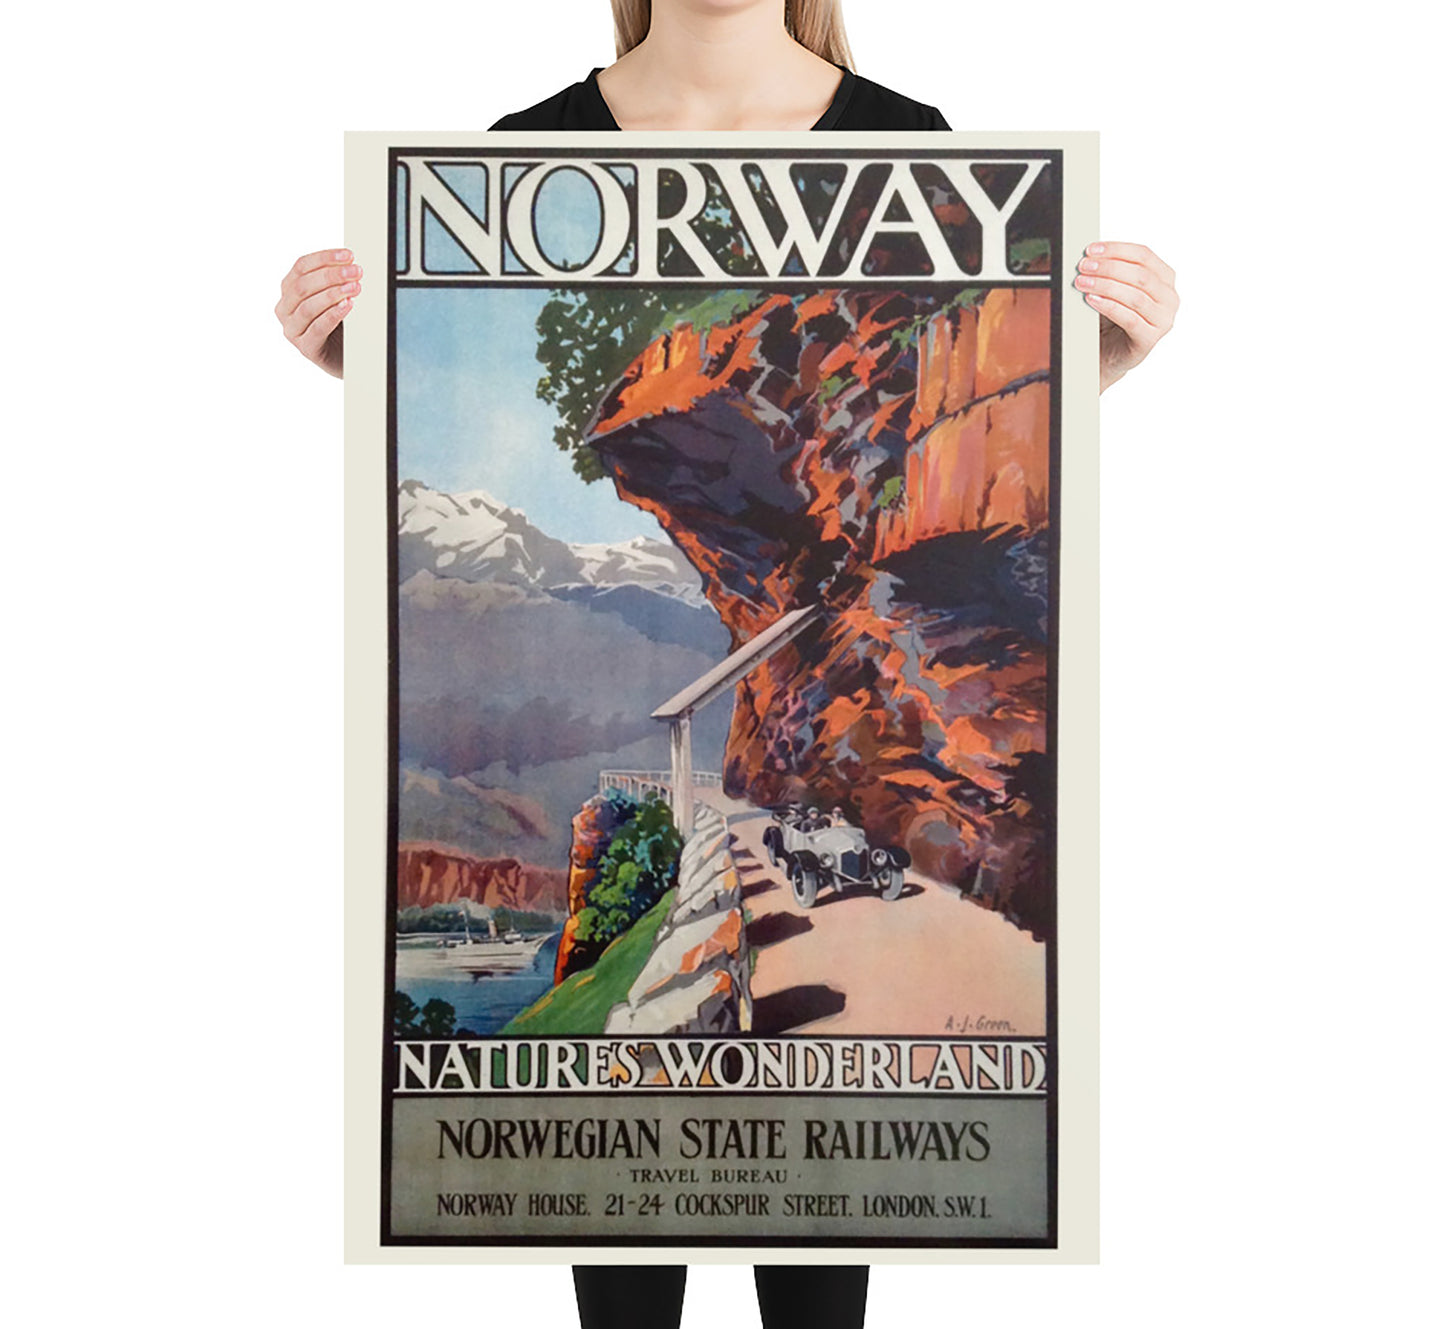 Natures wonderland, Norway vintage travel poster by unknown author, 1930s.